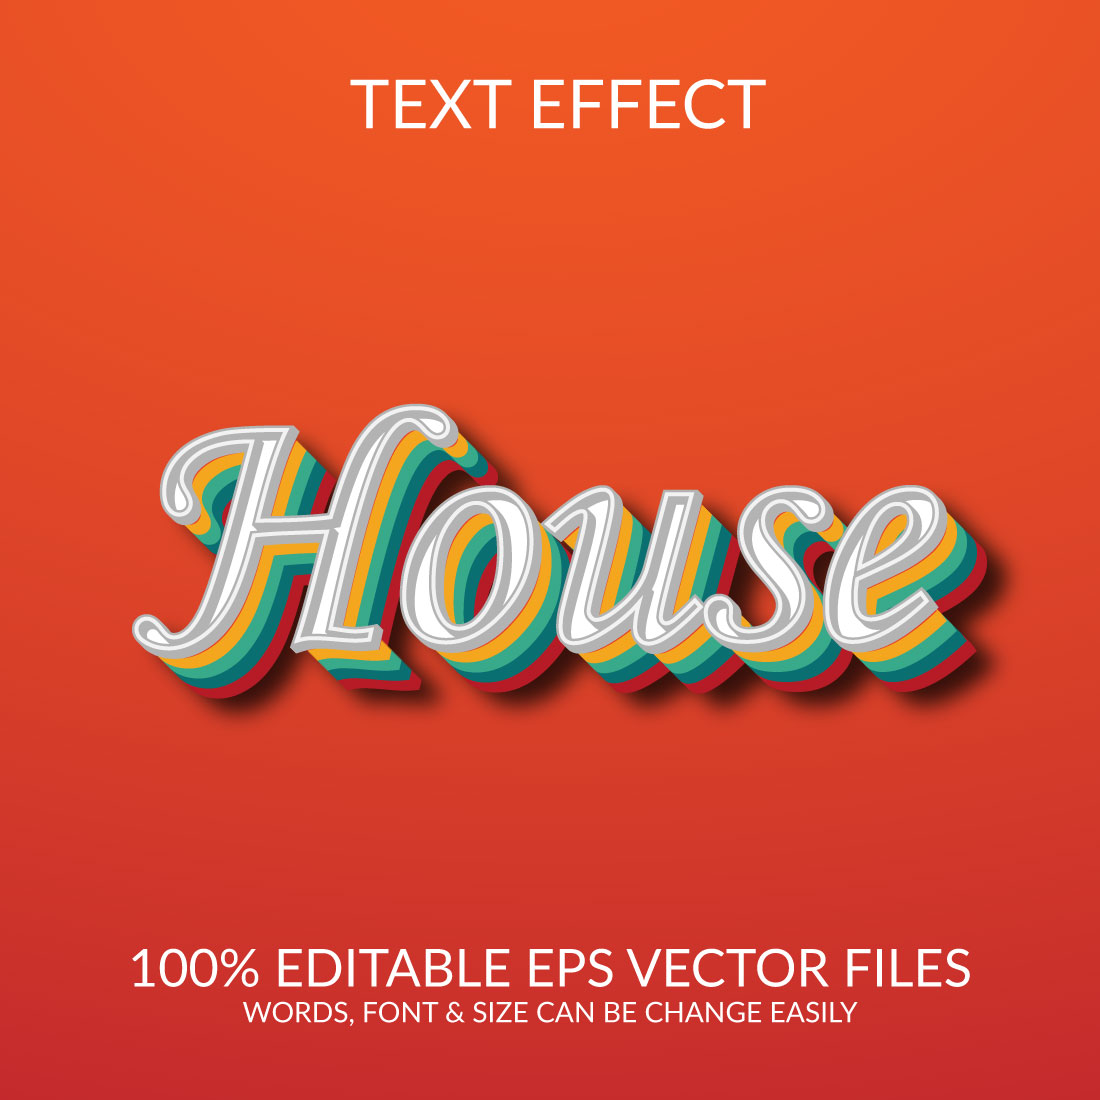 House 3d text effect template design preview image.